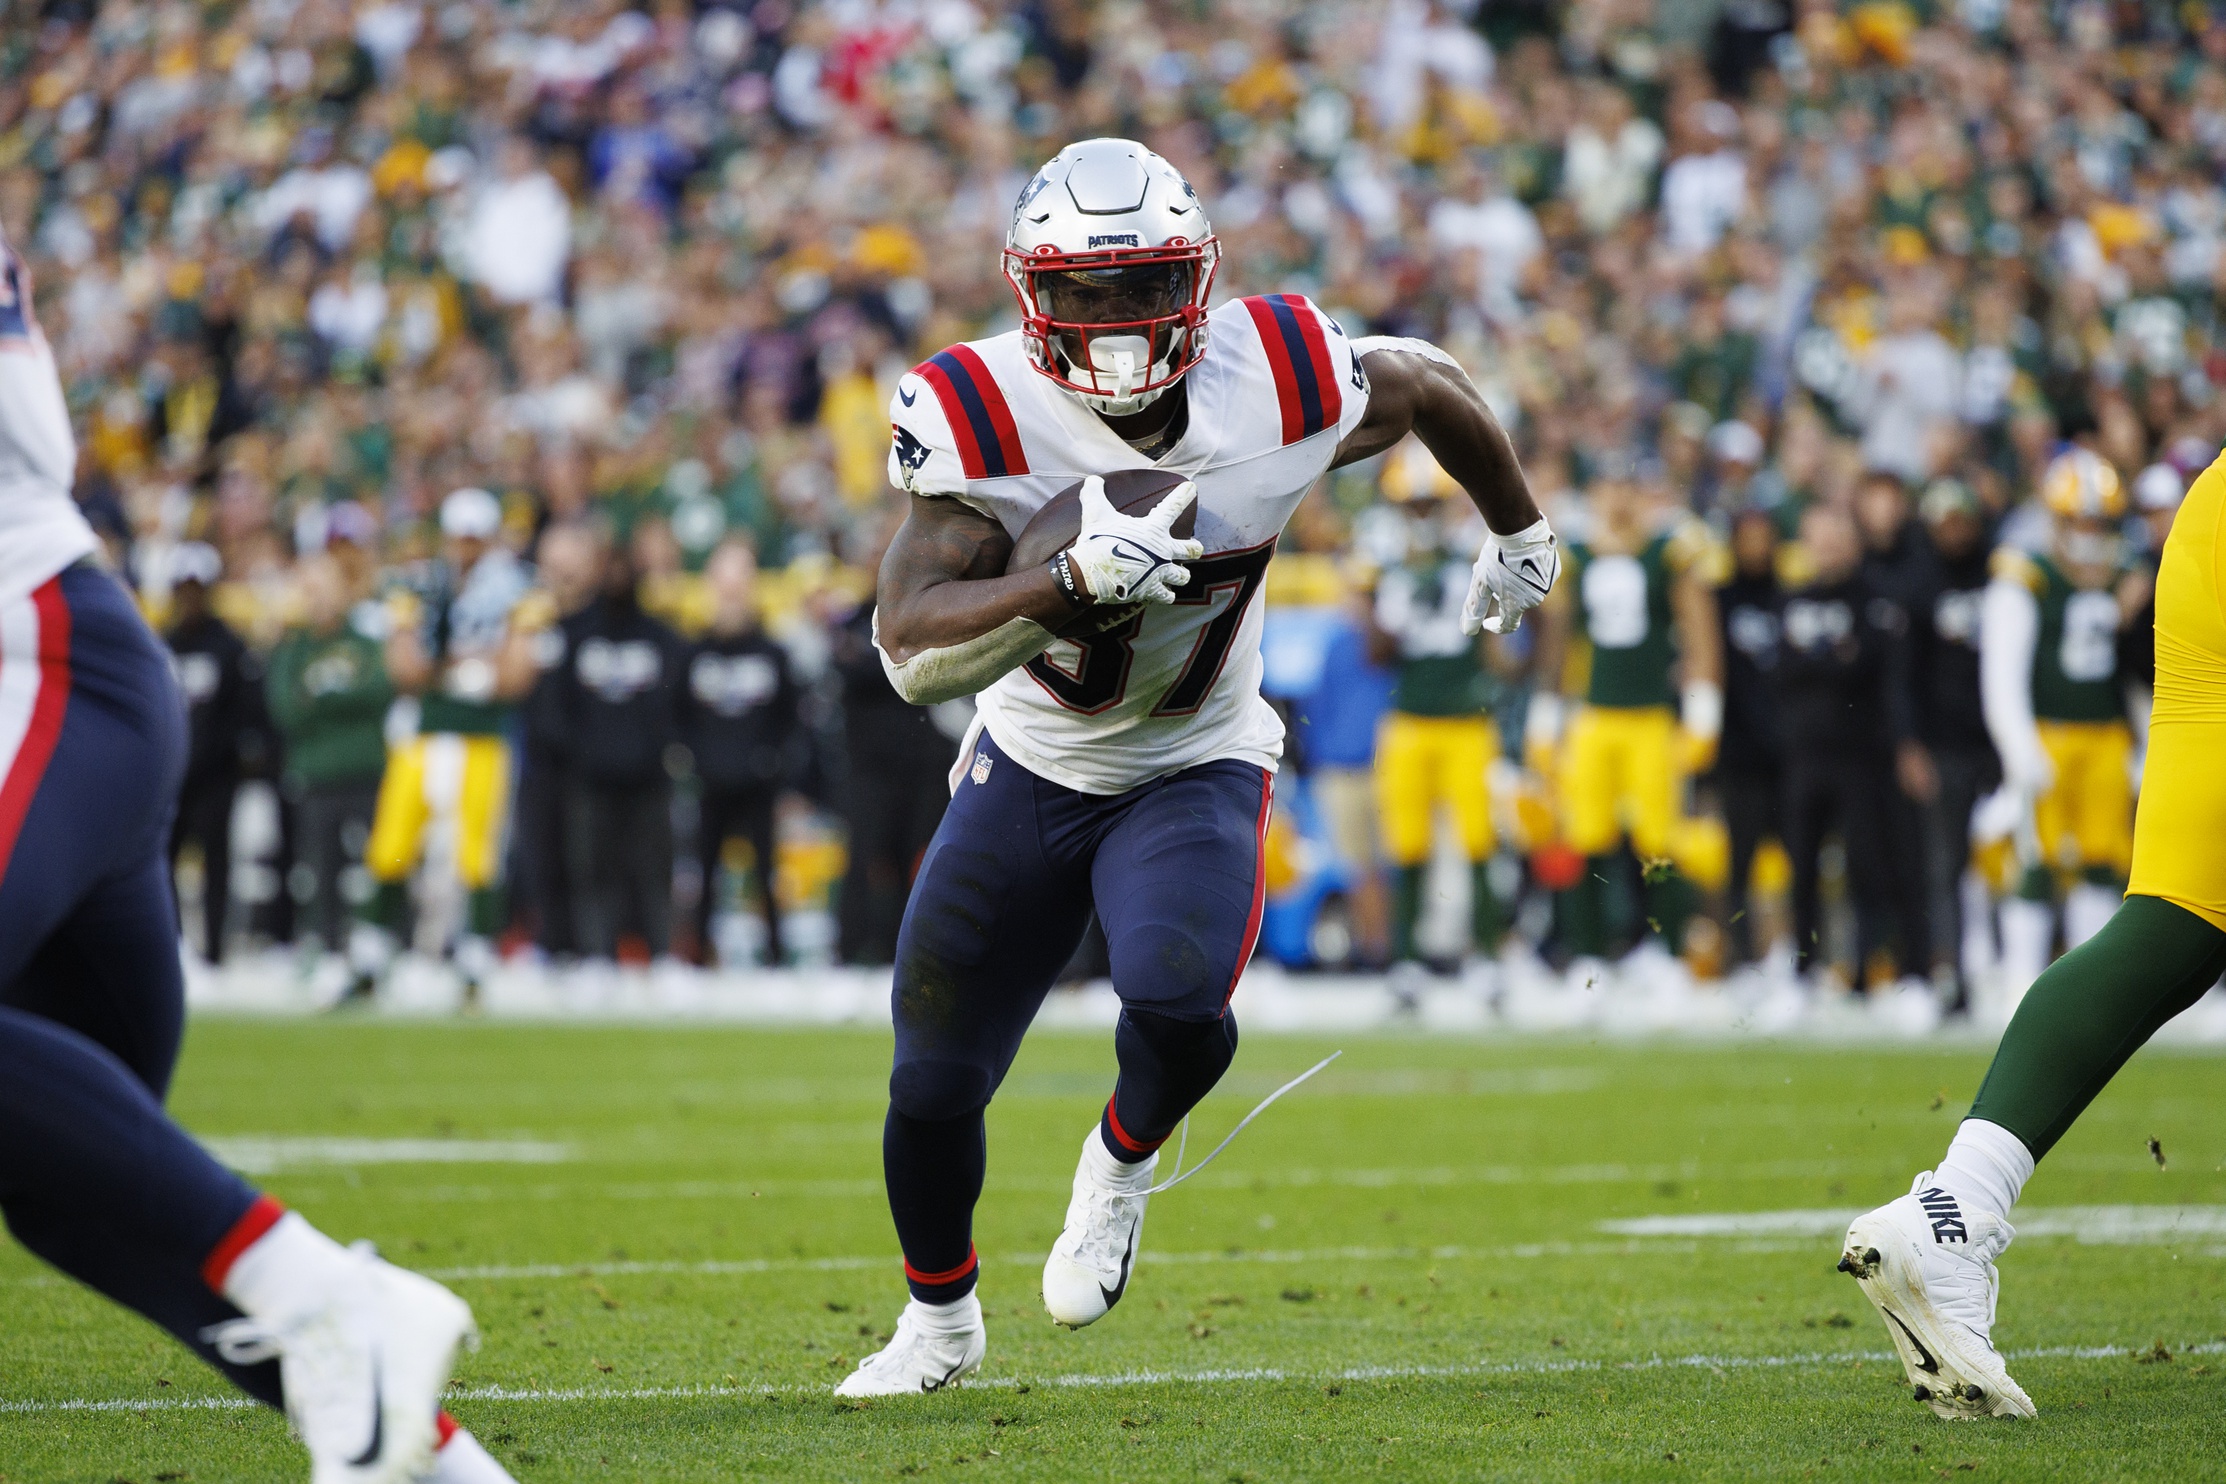 Jakobi Meyers injury update: Patriots WR questionable for Week 6